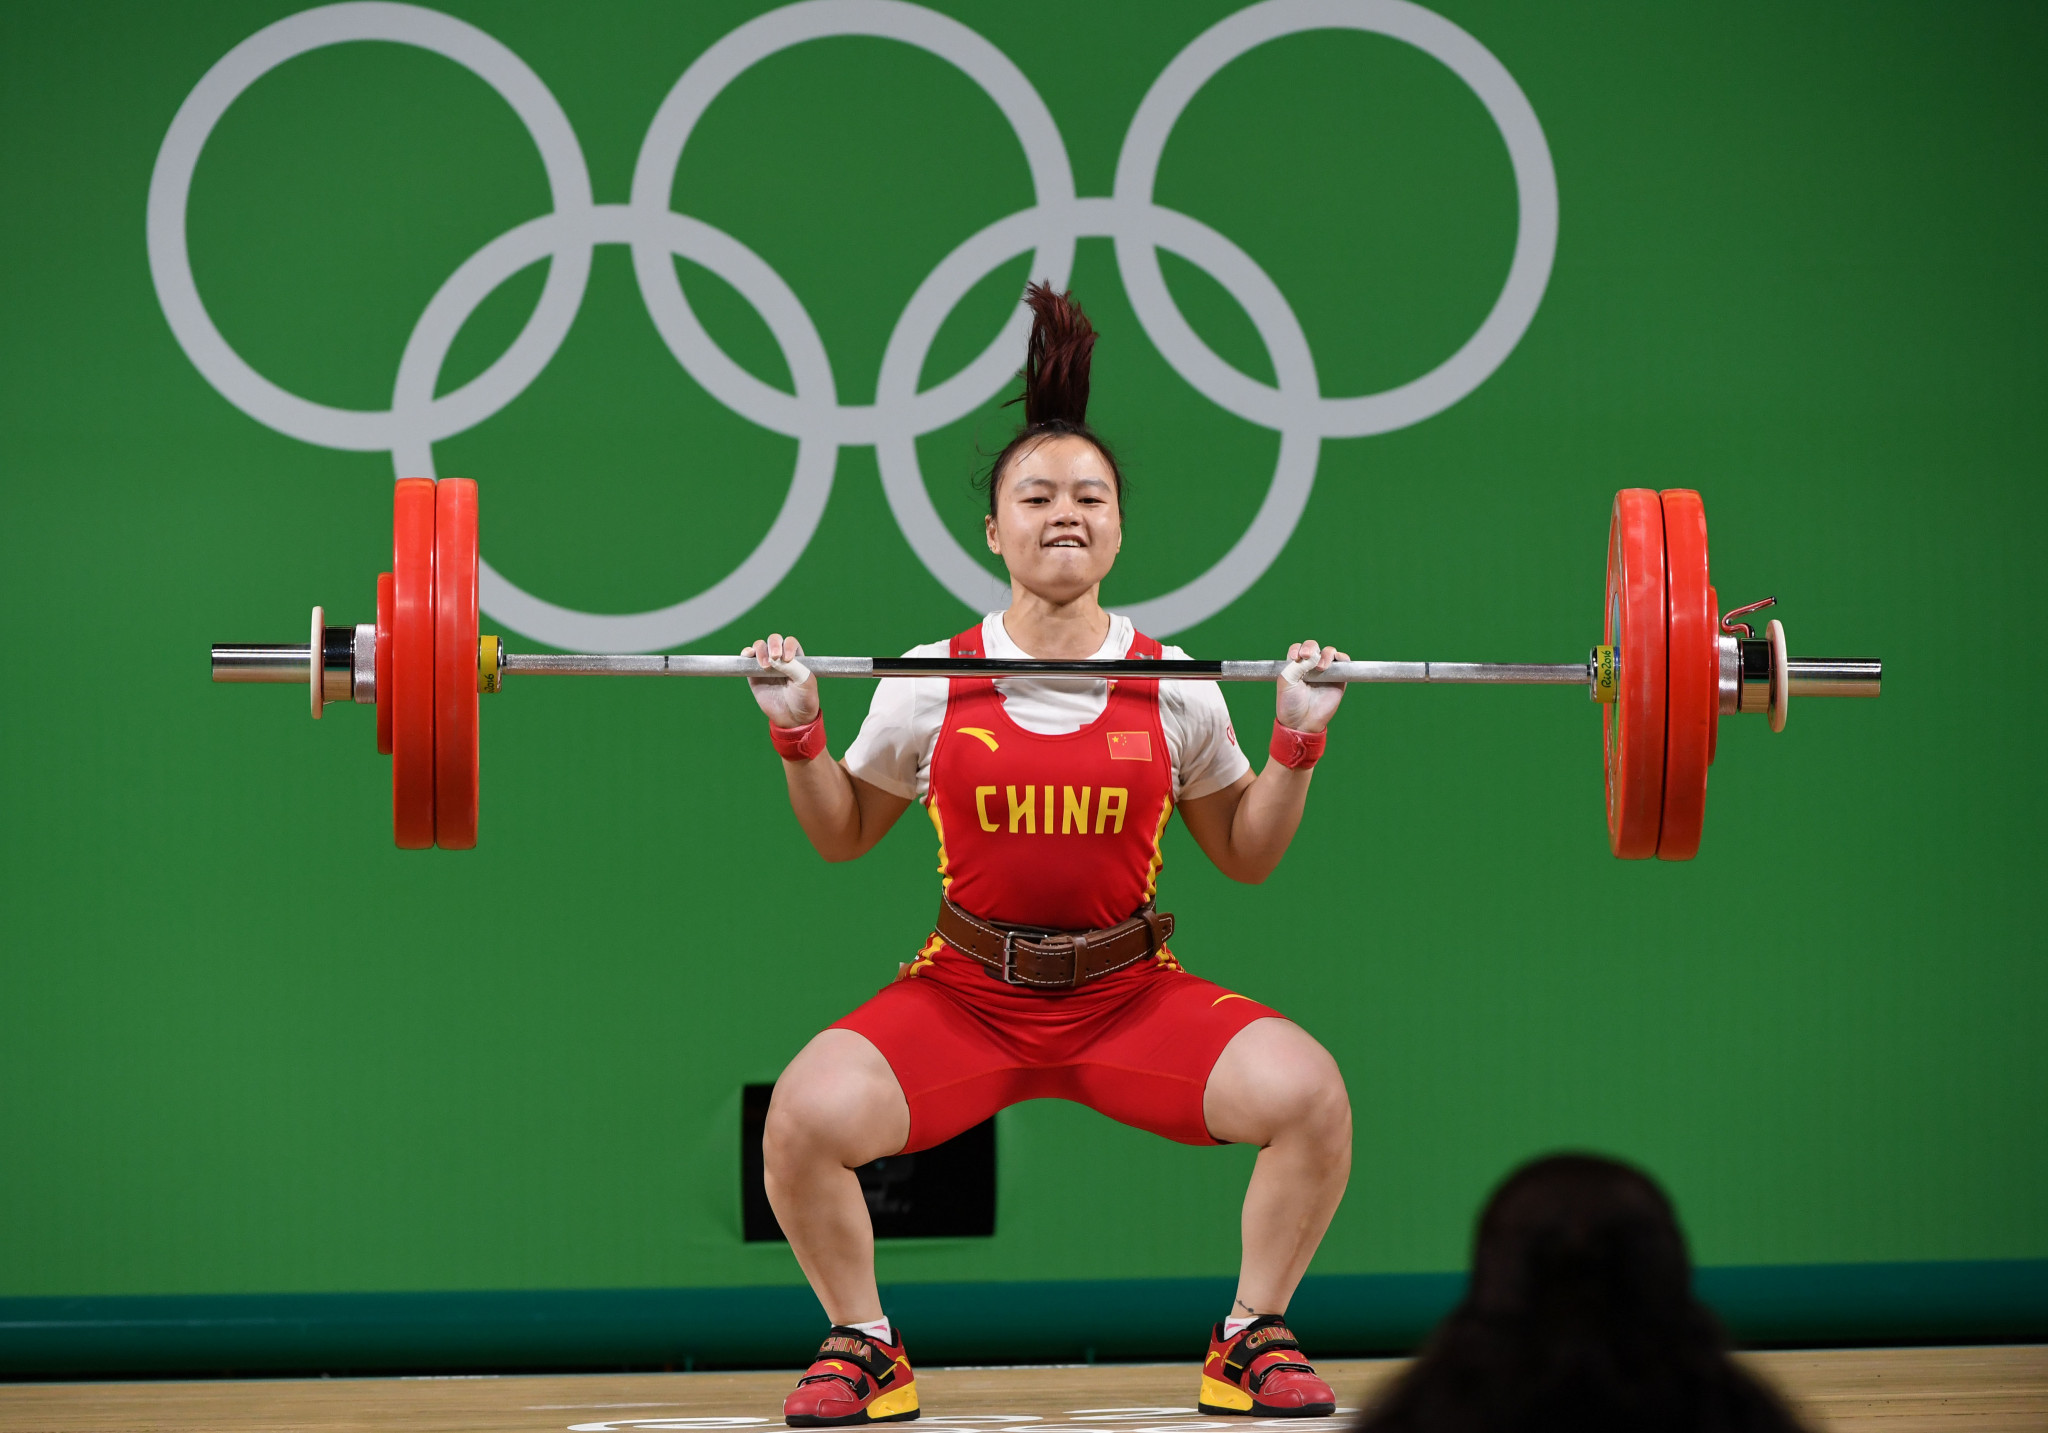 Li Yajun, in line to be upgraded to world champion, won a silver medal today ©Getty Images